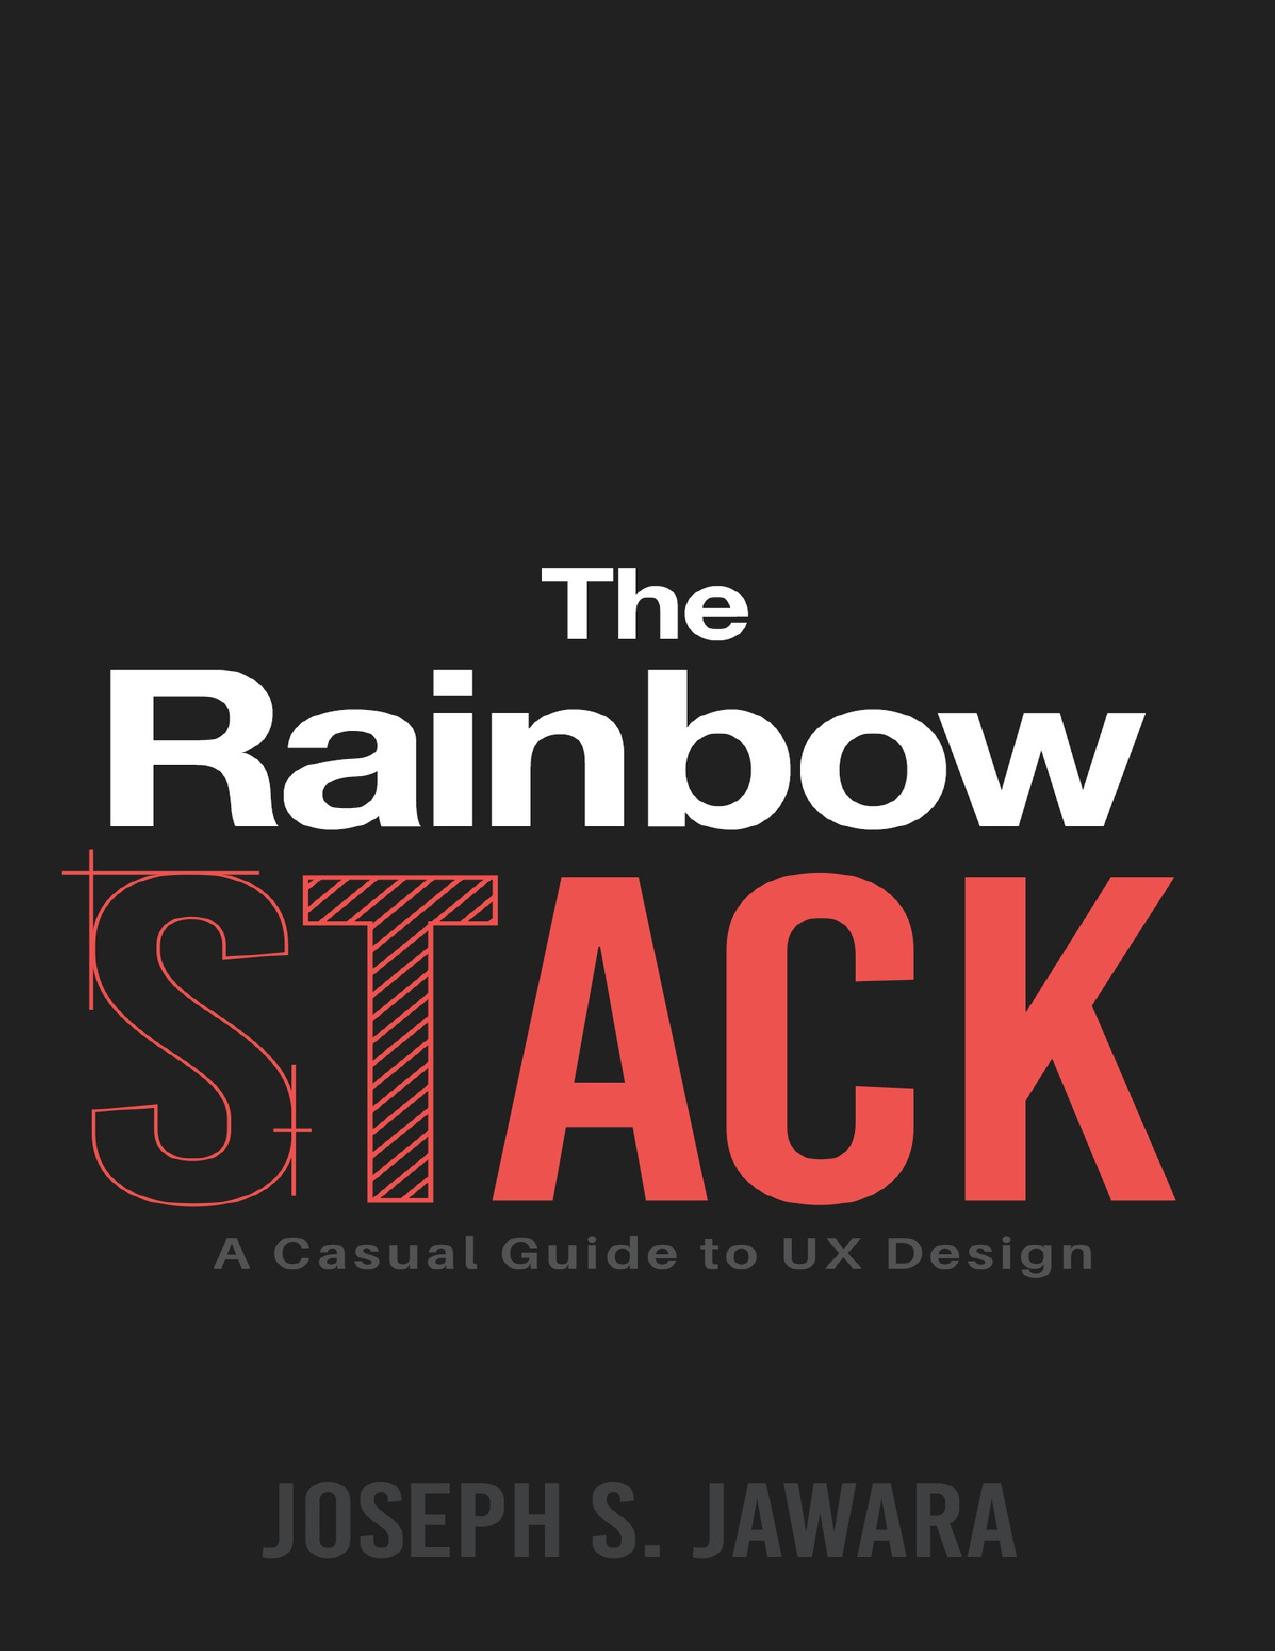 The Rainbow Stack: A Casual Guide to UX Design by Jawara Joseph